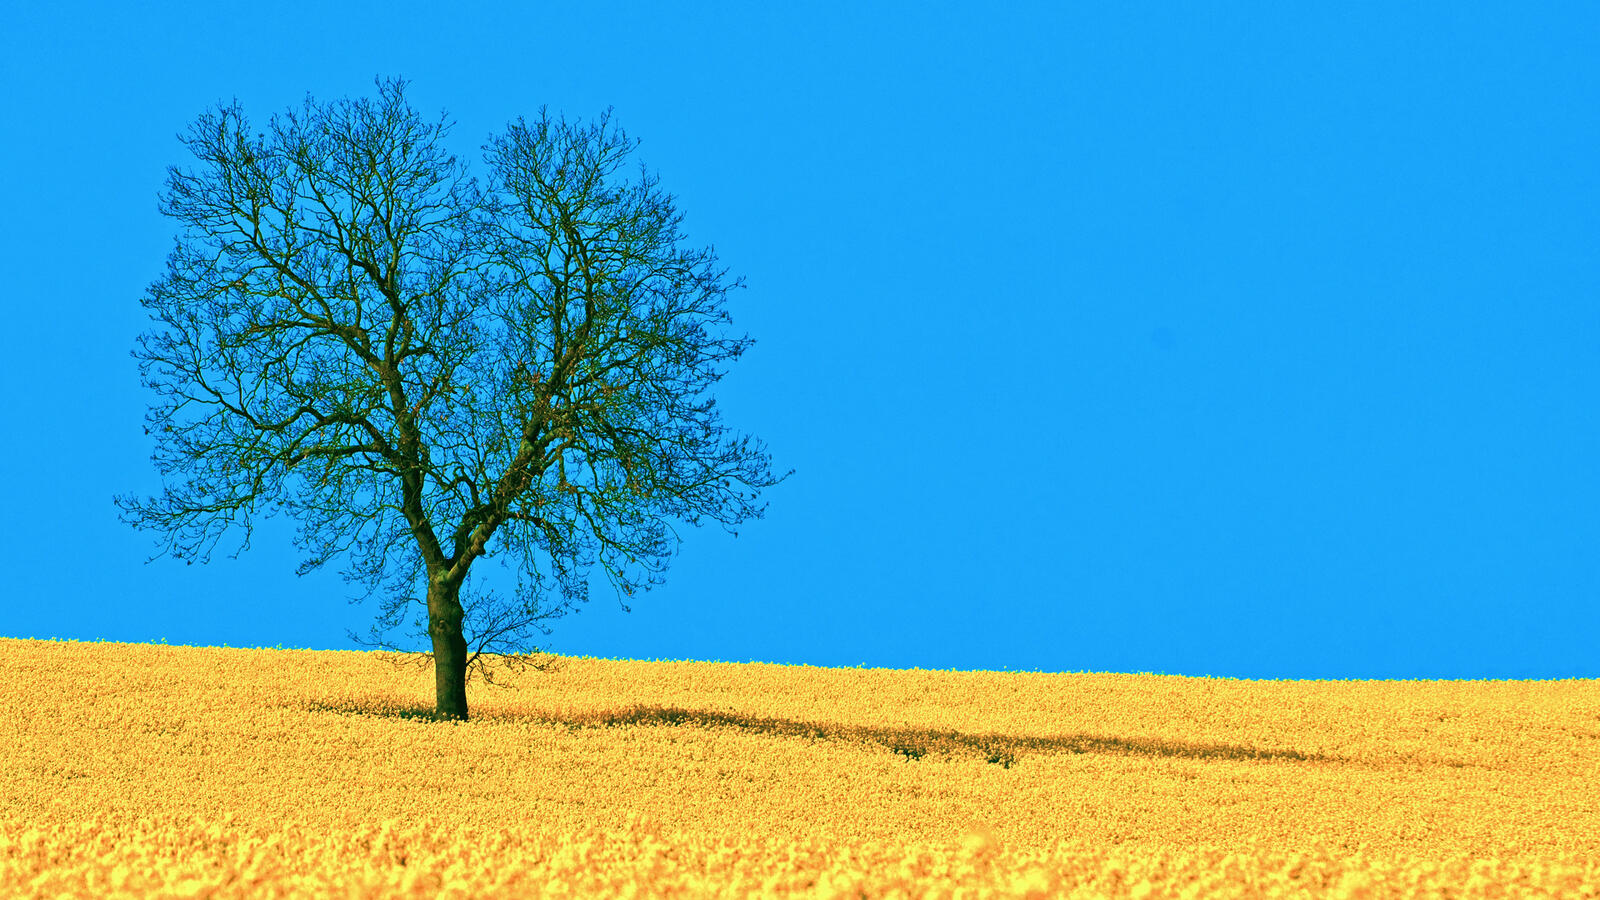 Wallpapers nature blue and yellow sky on the desktop